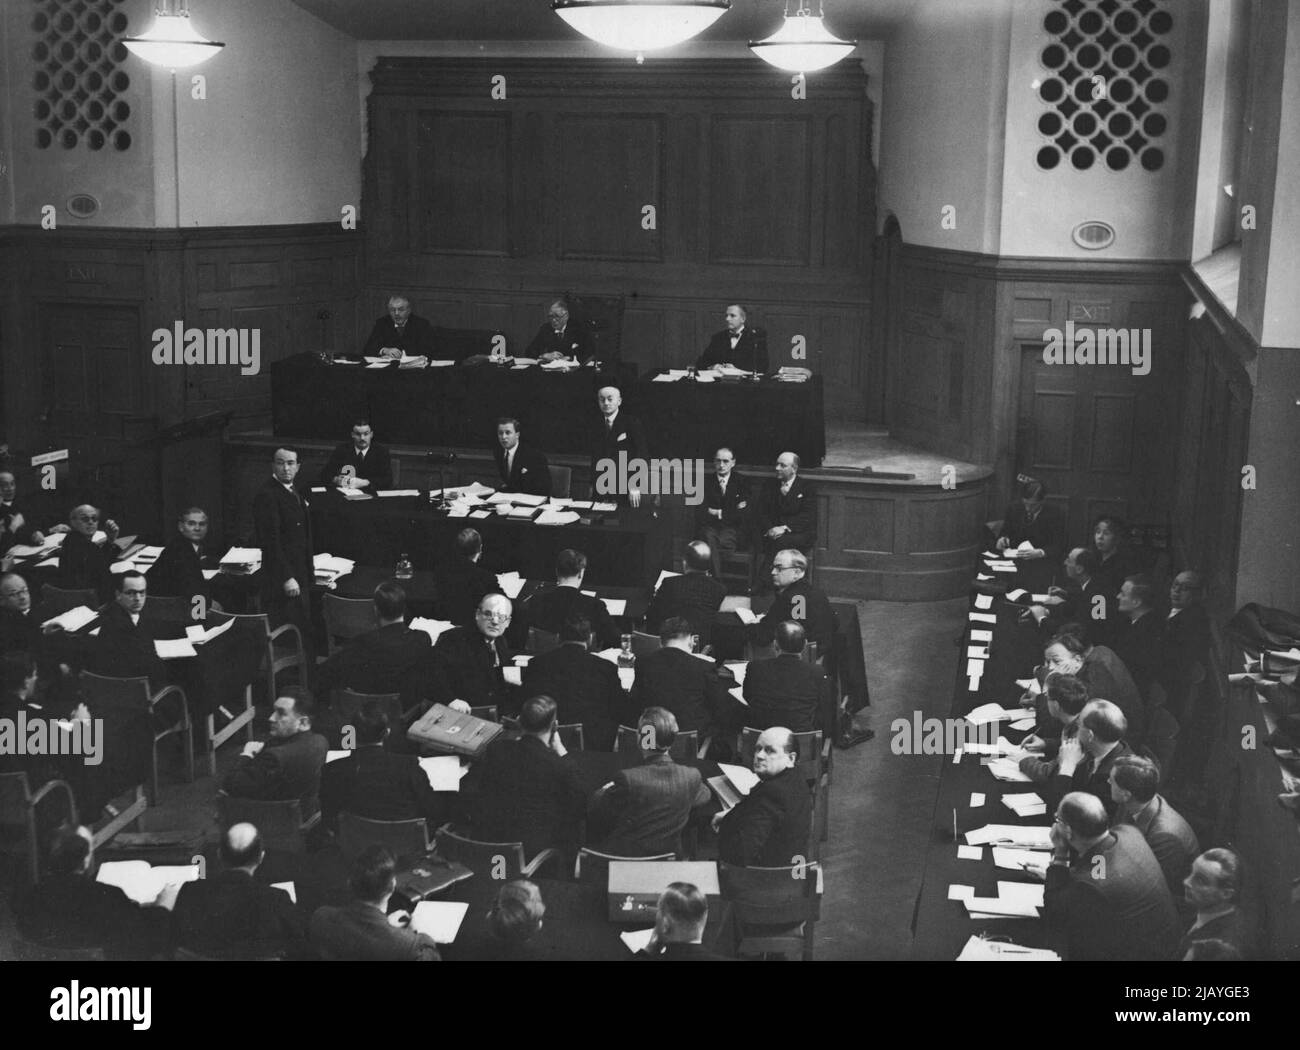 Bribes Inquiry Opens - A general view of the scene in the Hoare Memorial Hall, Church House, Westminster, this morning, November 15, as the judicial inquiry into alleger irregularities in Government departments re-opened. President of the Inquiry, Mr. Justice Lynskey is seen, centre, on the presidential bench, with Mr. Russell Vick, K.C. (left) and Mr. Gerald Upjohn (right), comprising the tribunal. Standing in well of Chamber, at left, facing camera, is the Attorney General, Sir Hartley Shawcross. November 15, 1948. (Photo by Associated Press Photo). Stock Photo